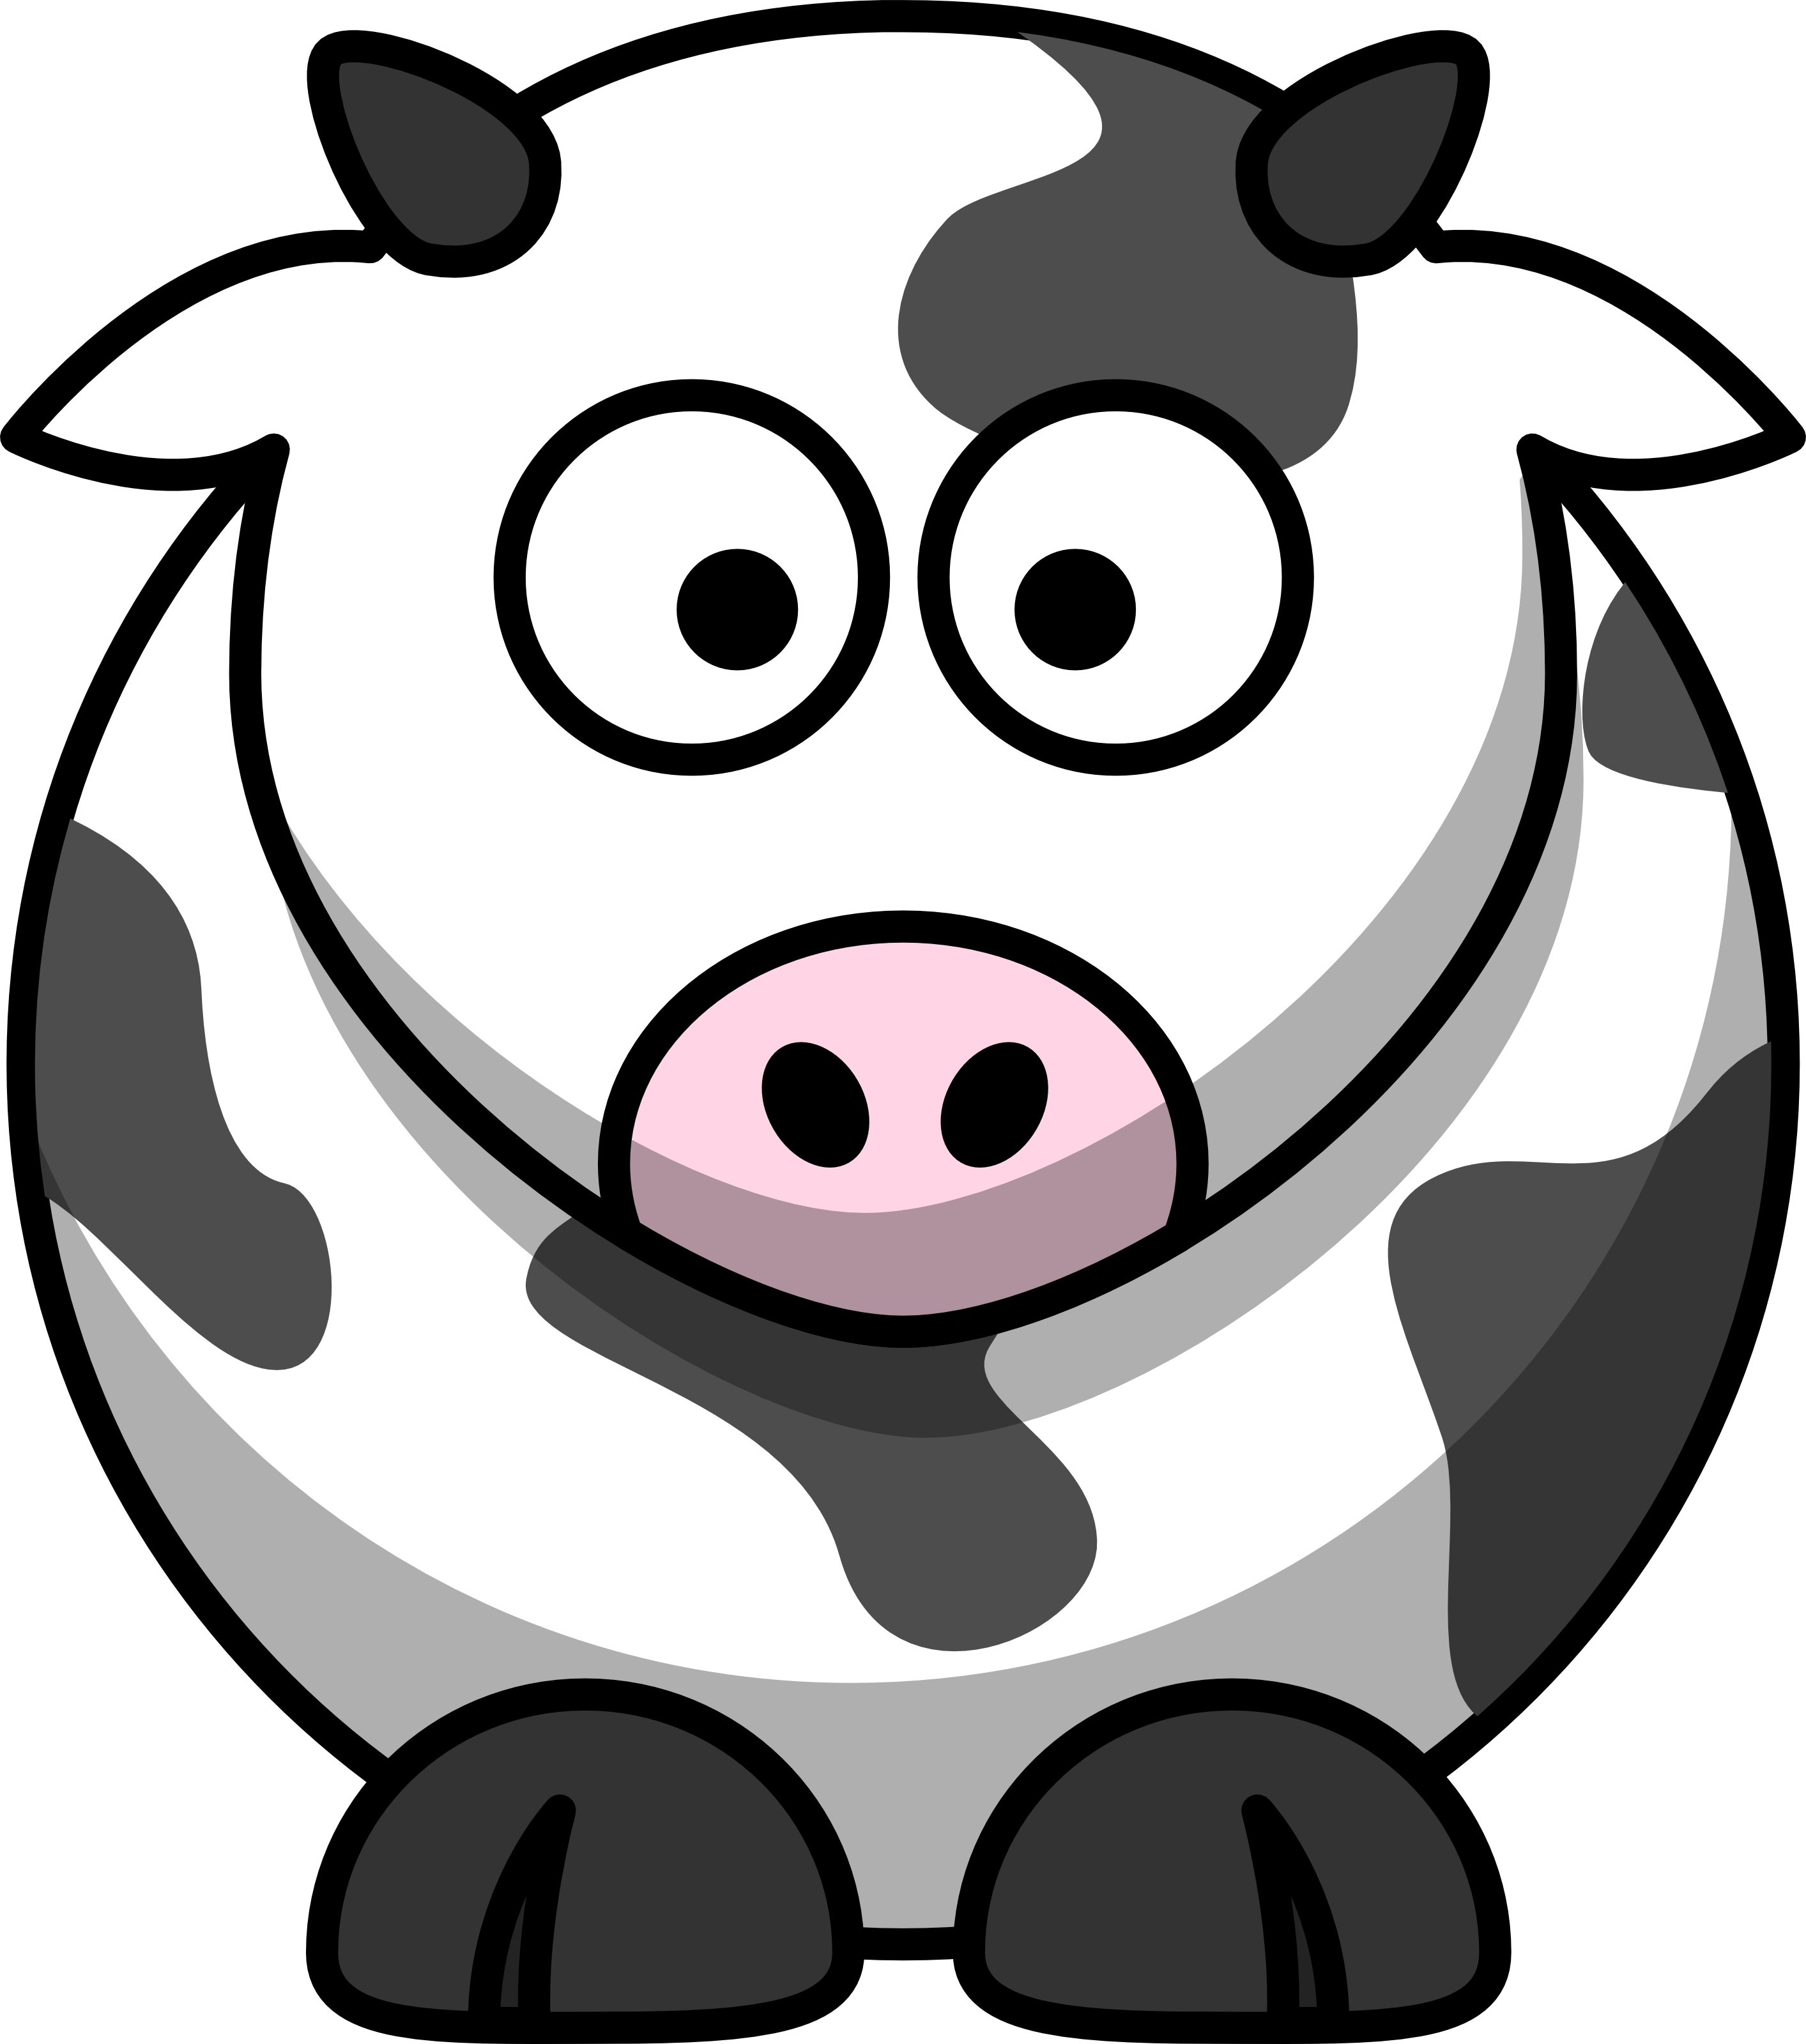 Free Cartoon Cow Clip Art | Free Images at Clipart library - vector clip 